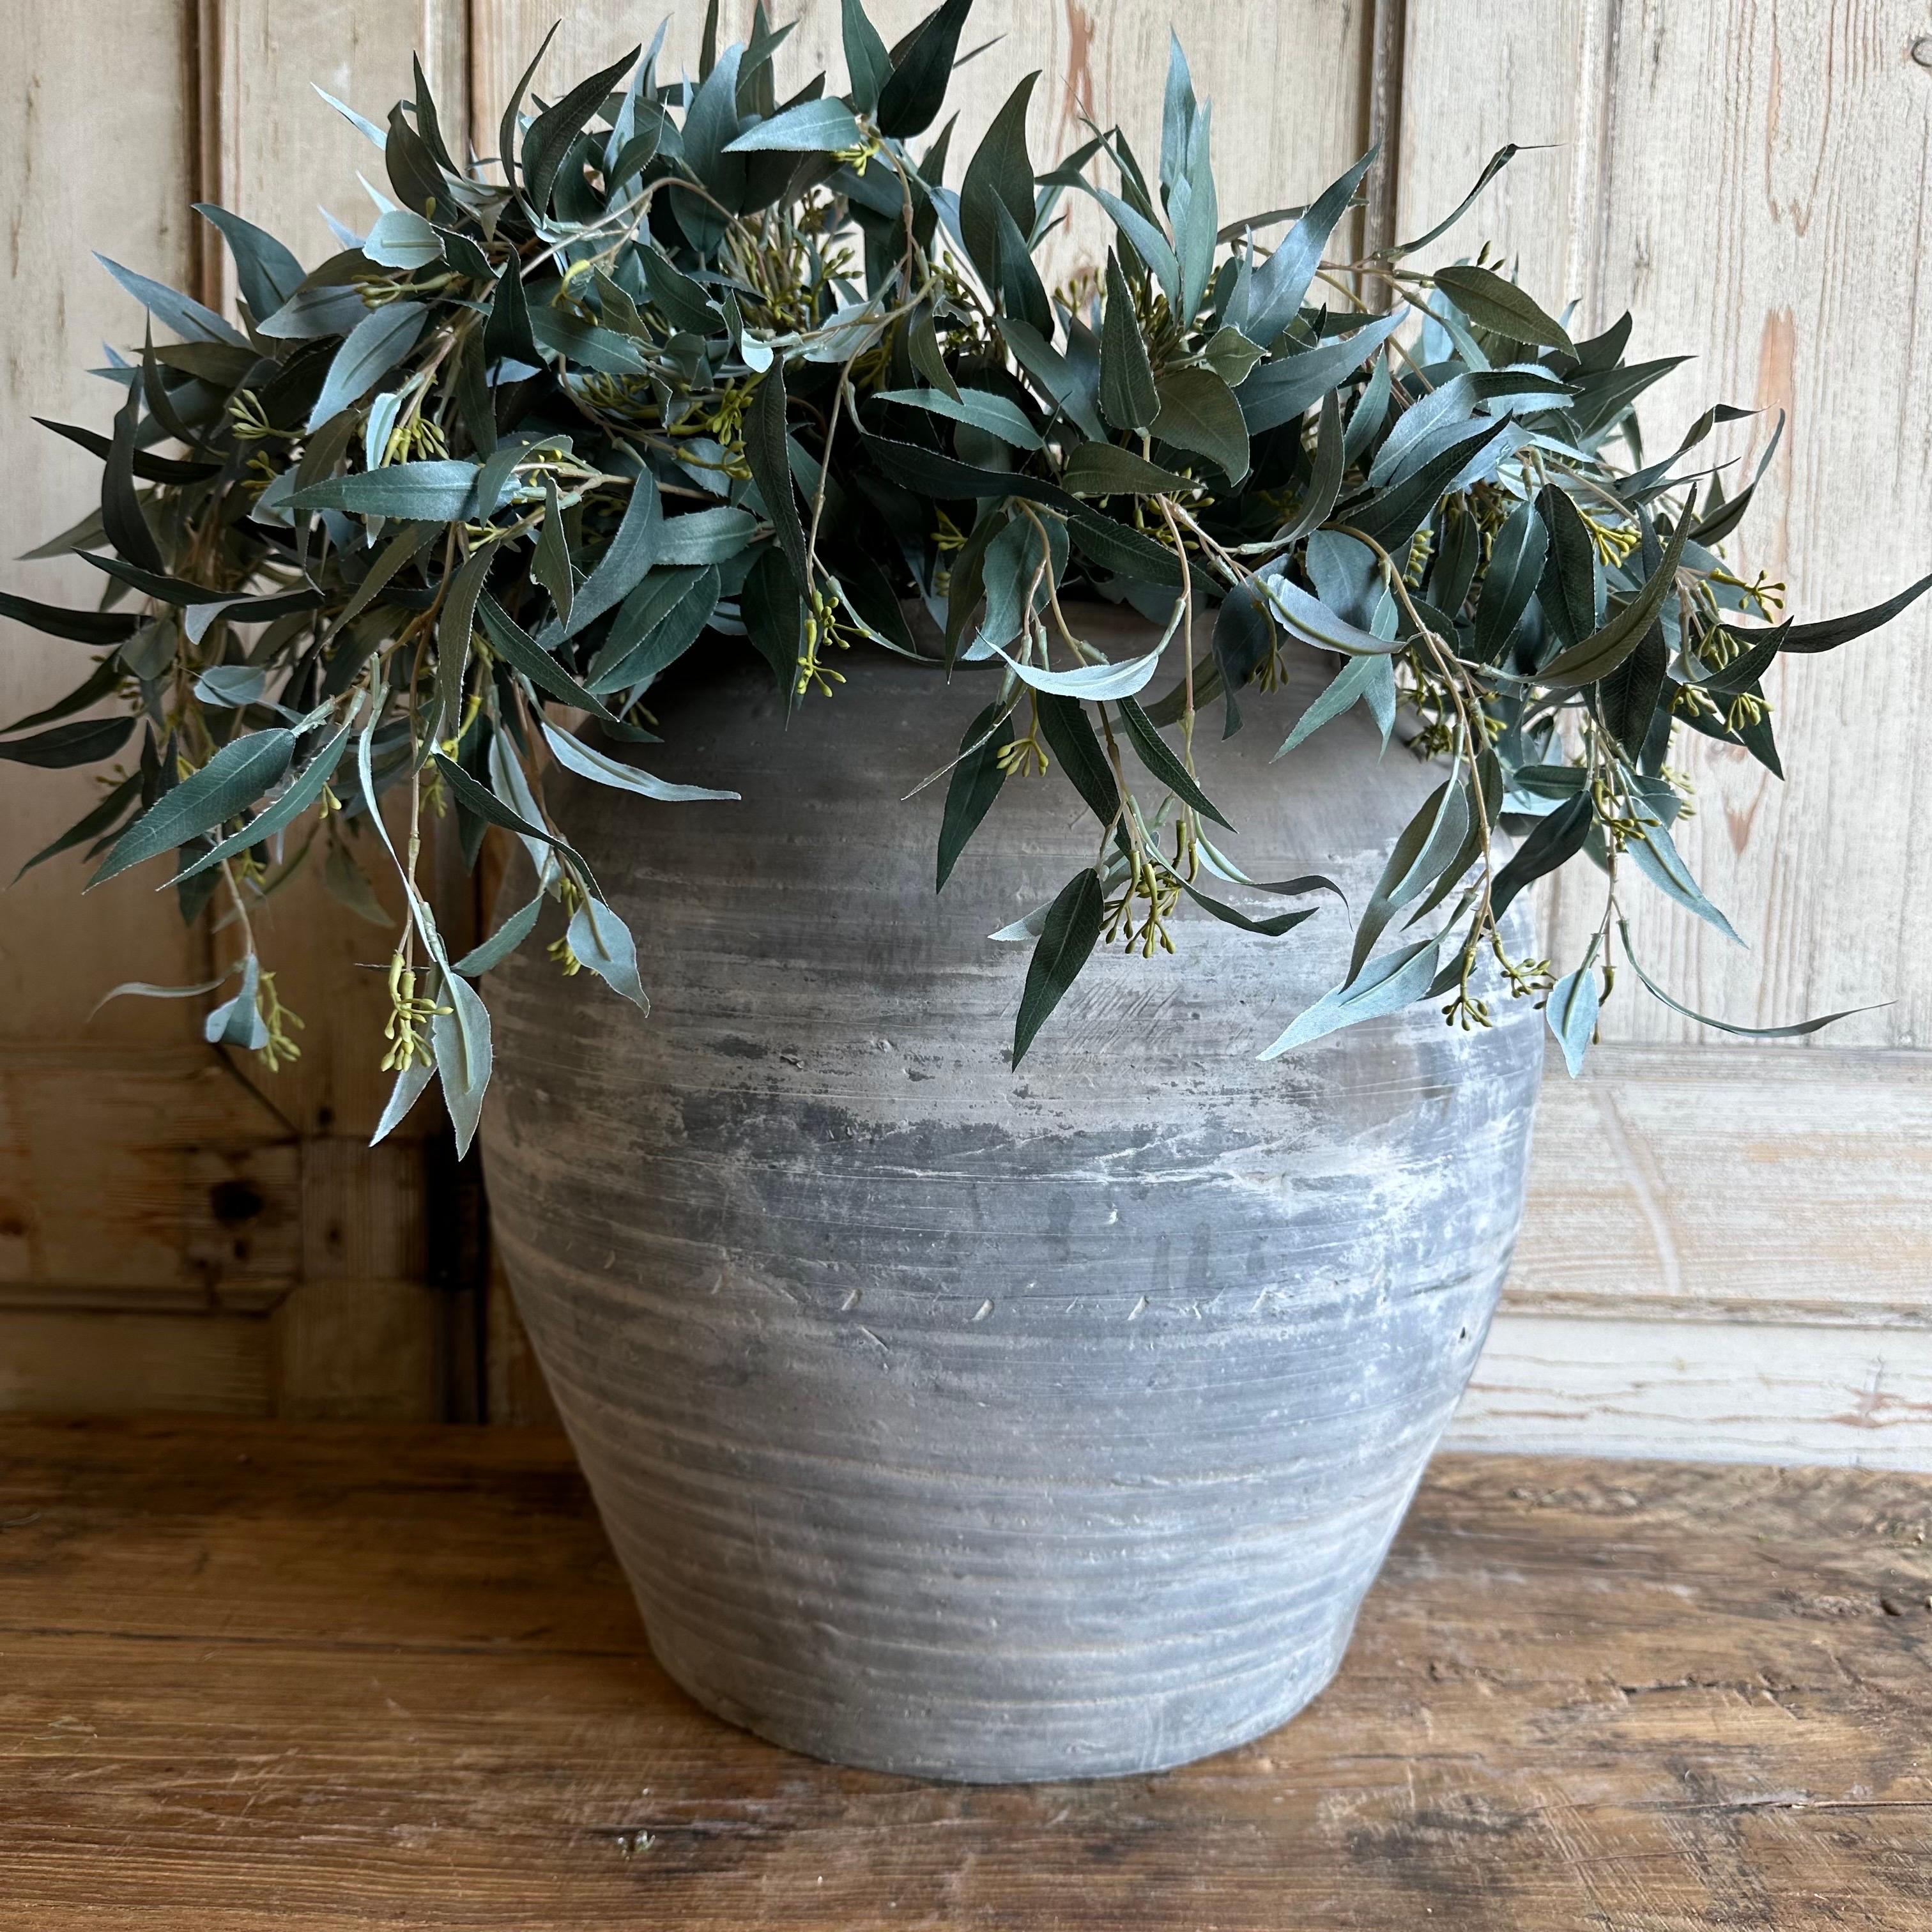 Vintage gray clay weathered pottery.
Beautiful weathered gray vintage clay pot that is beautifully colored and authentically worn. The surface of the pot and handle are peeling in places, revealing the original clay below. These qualities give the